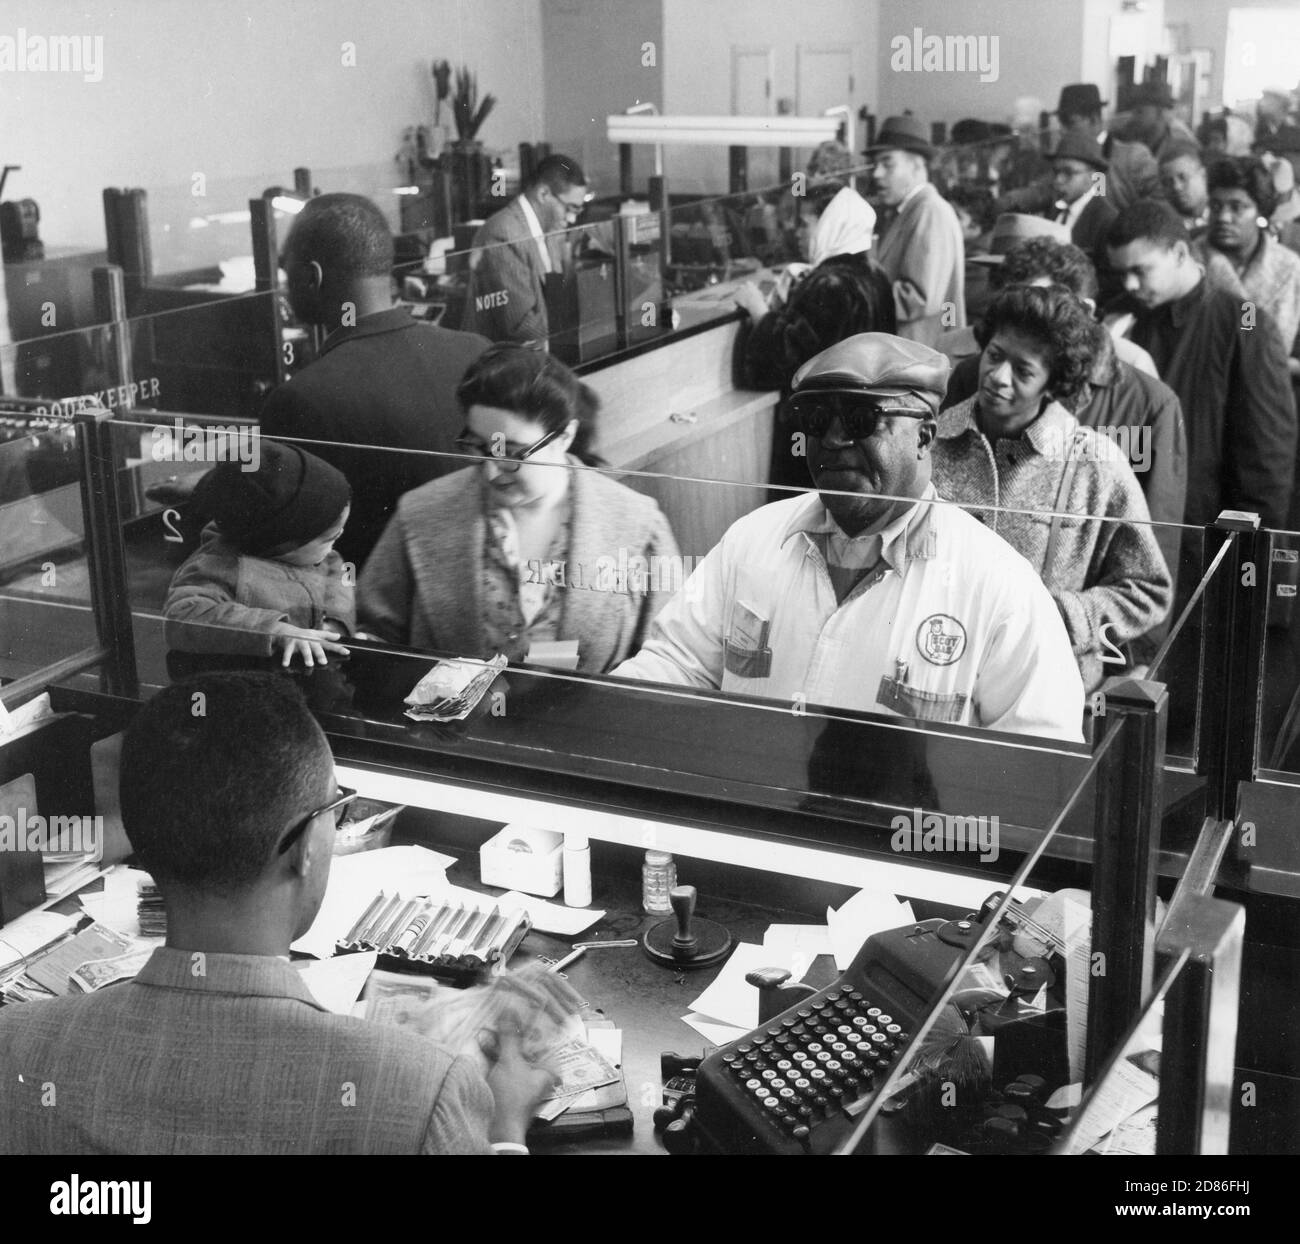 Customers crowd the teller lines to transact their banking business in the Industrial Bank, an historic African-American-owned bank based in Washington, DC whose board of directors, personnel and stockholders are African-Americans, Washington, DC, 1961. (Photo by Pinto/United States Information Agency/RBM Vintage Images) Stock Photo